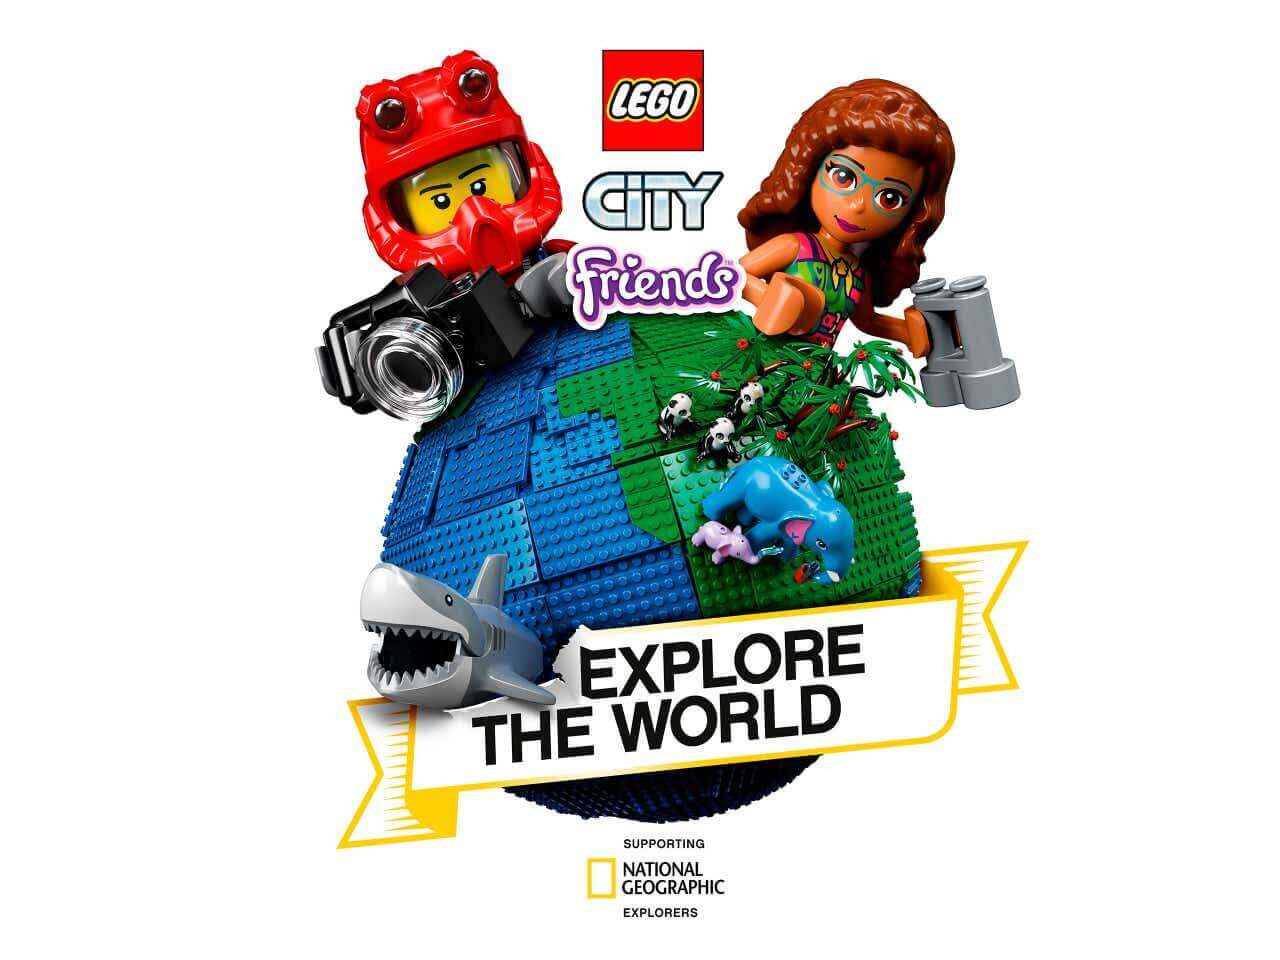 Lego group and National Geographic Explore the world